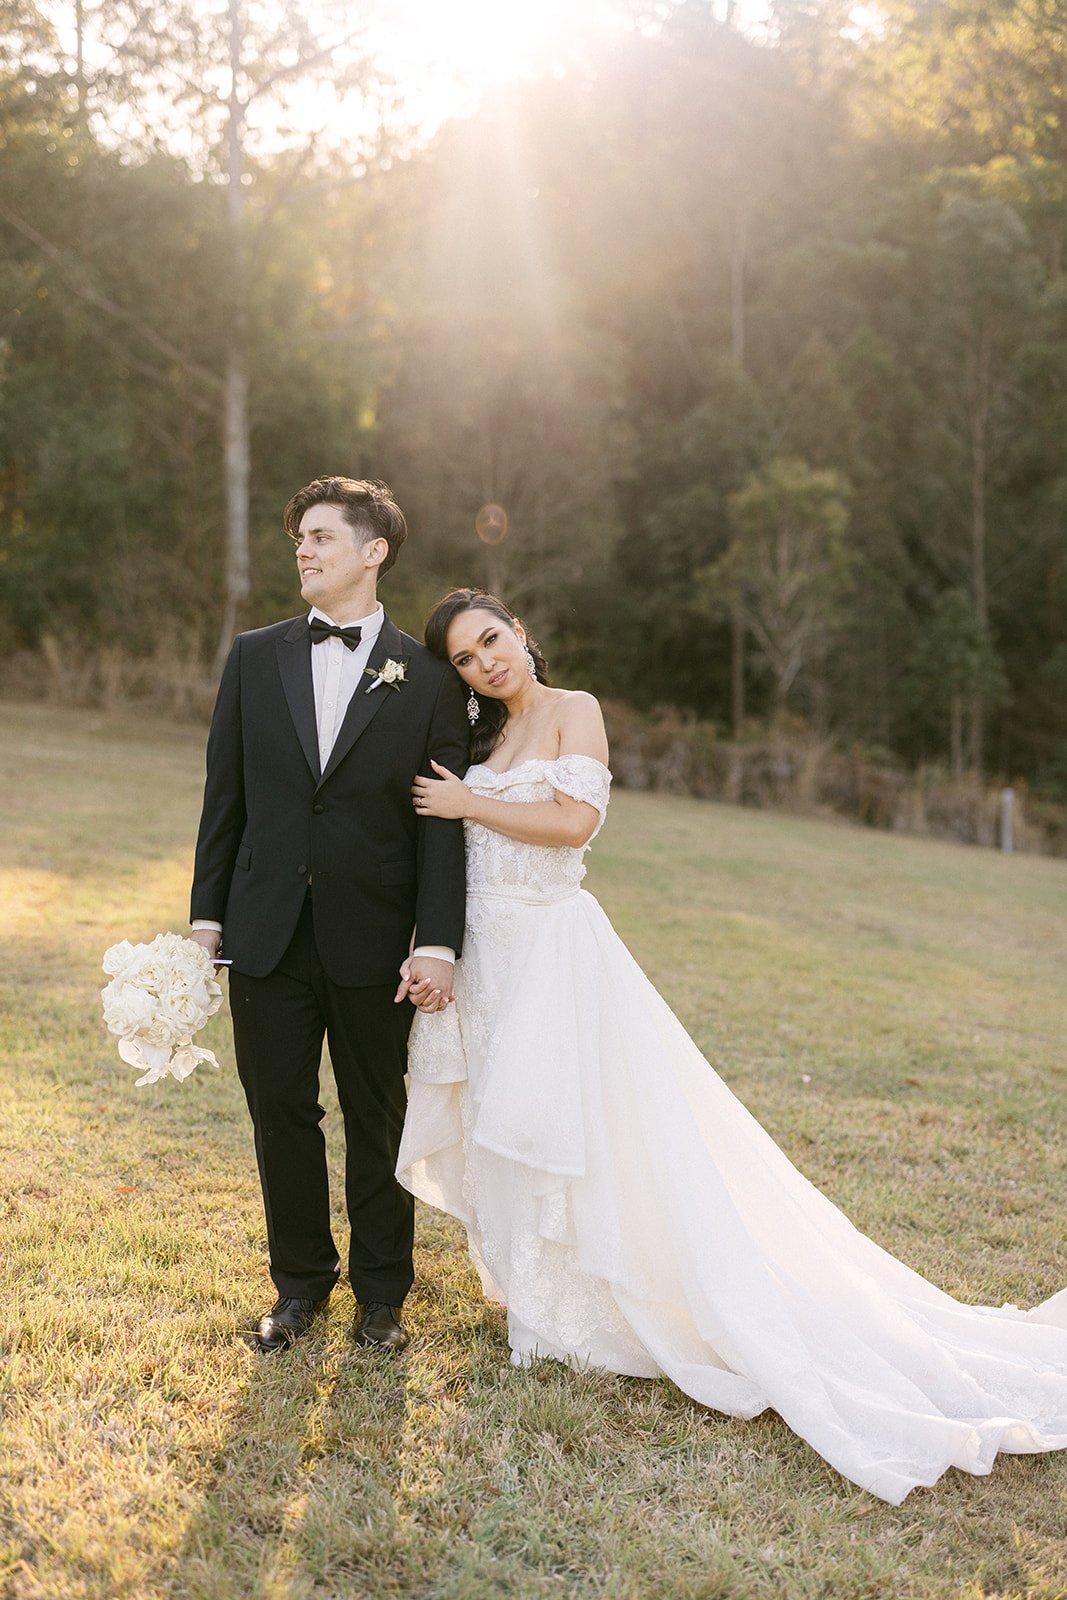 A bride in a long white gown leans on her grooms shoulder. A golden sunset is behind them